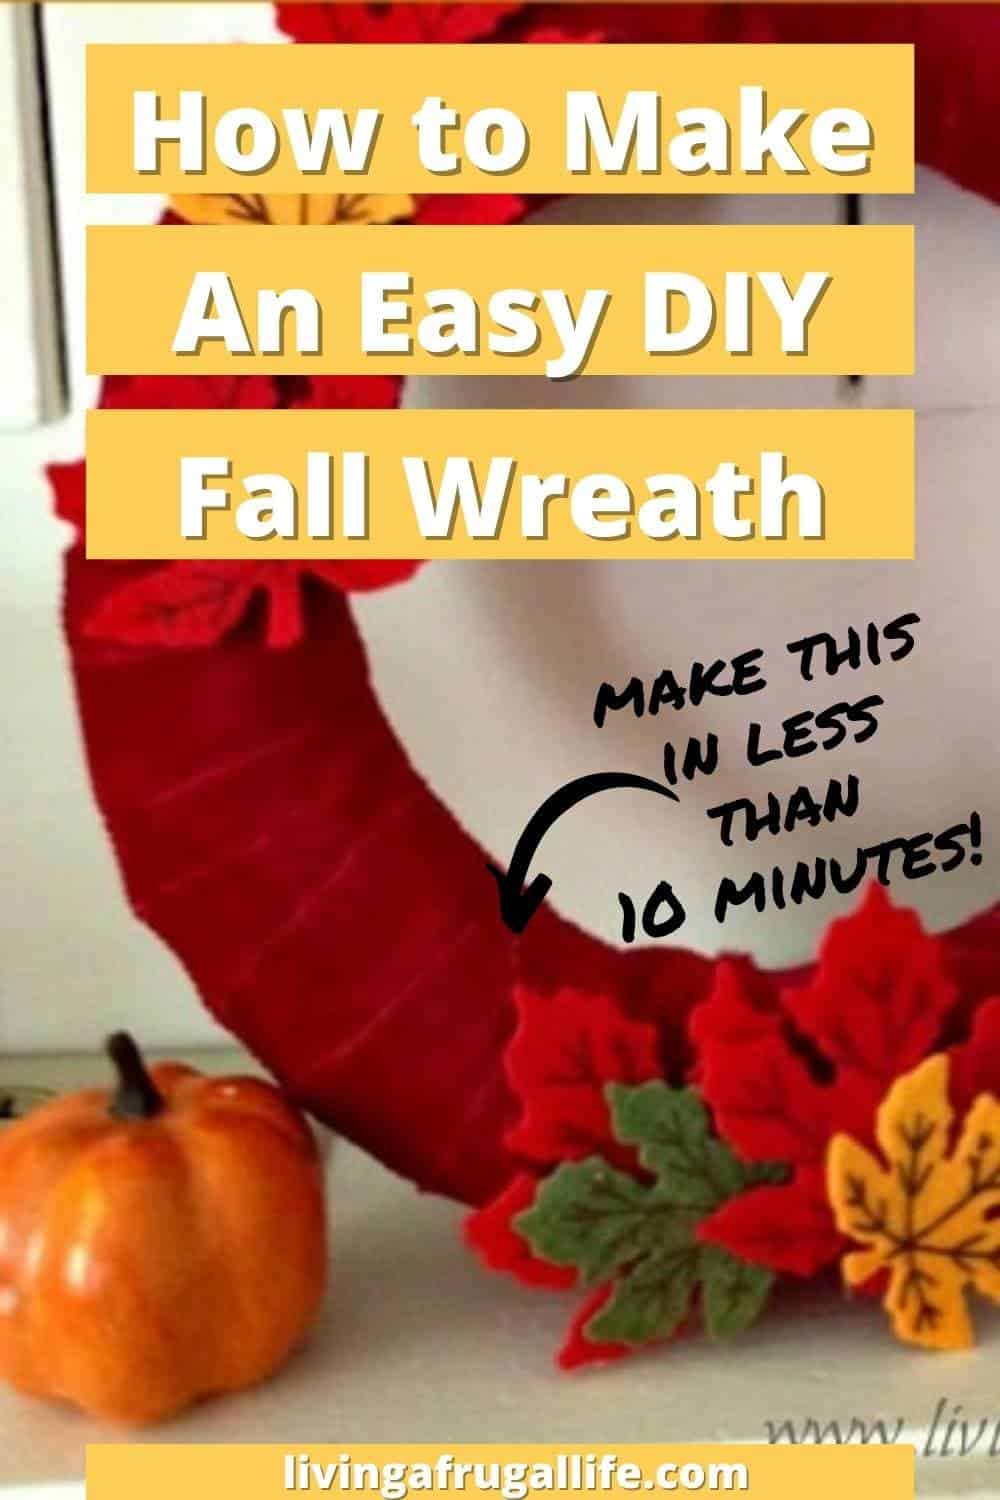 How To Make An Easy DIY Fall Wreath with Dollar Store Items